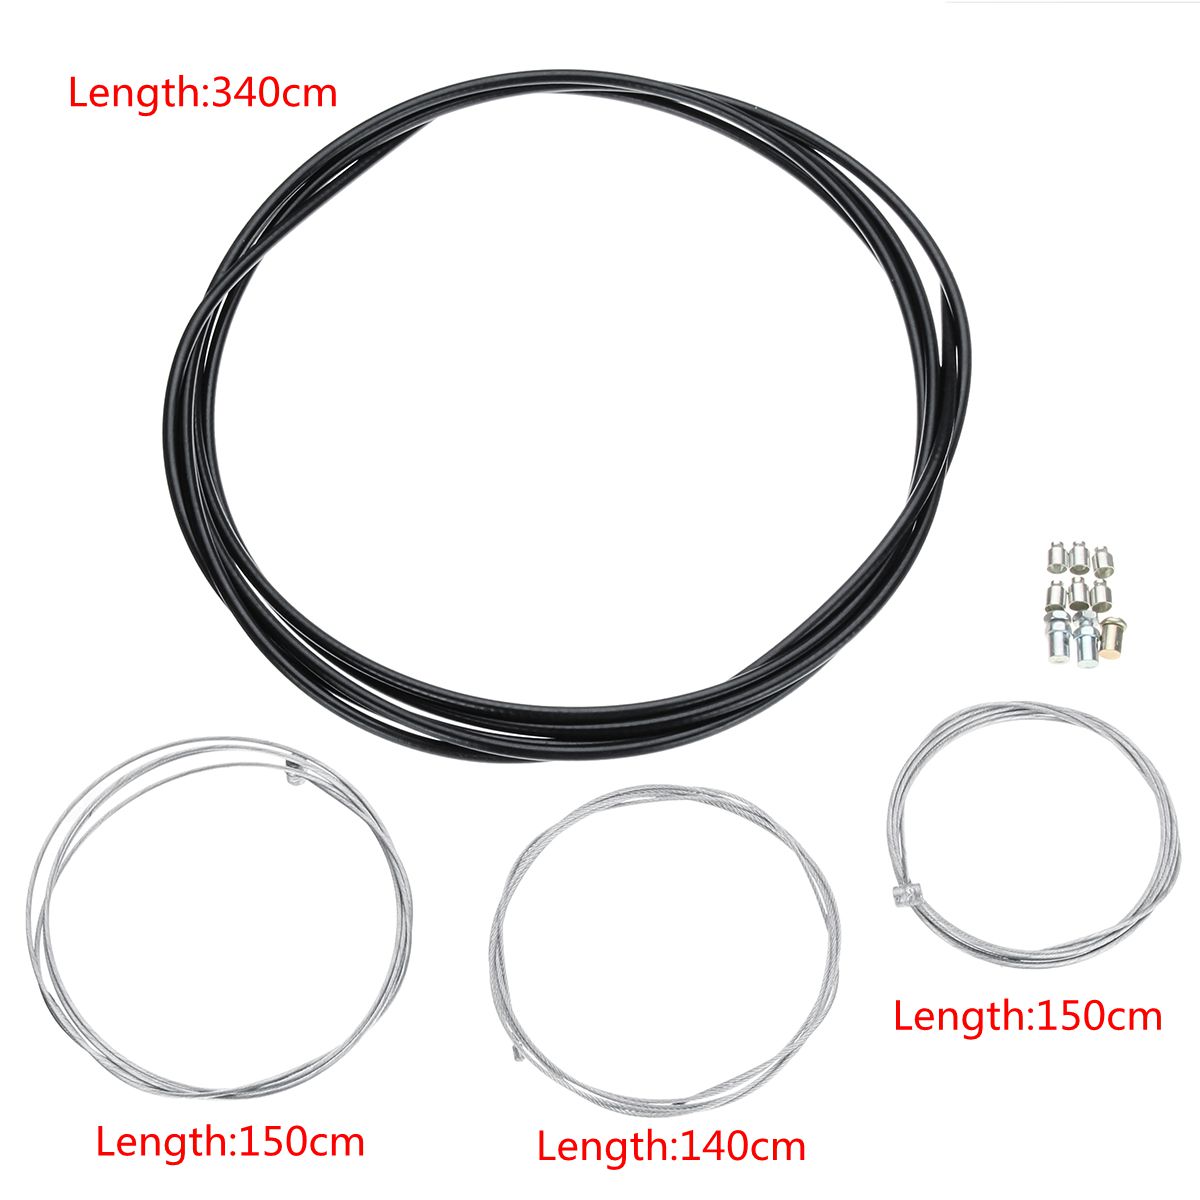 Universal Motorcycle Clutch Brake Throttle Cable Set Replacement Kit